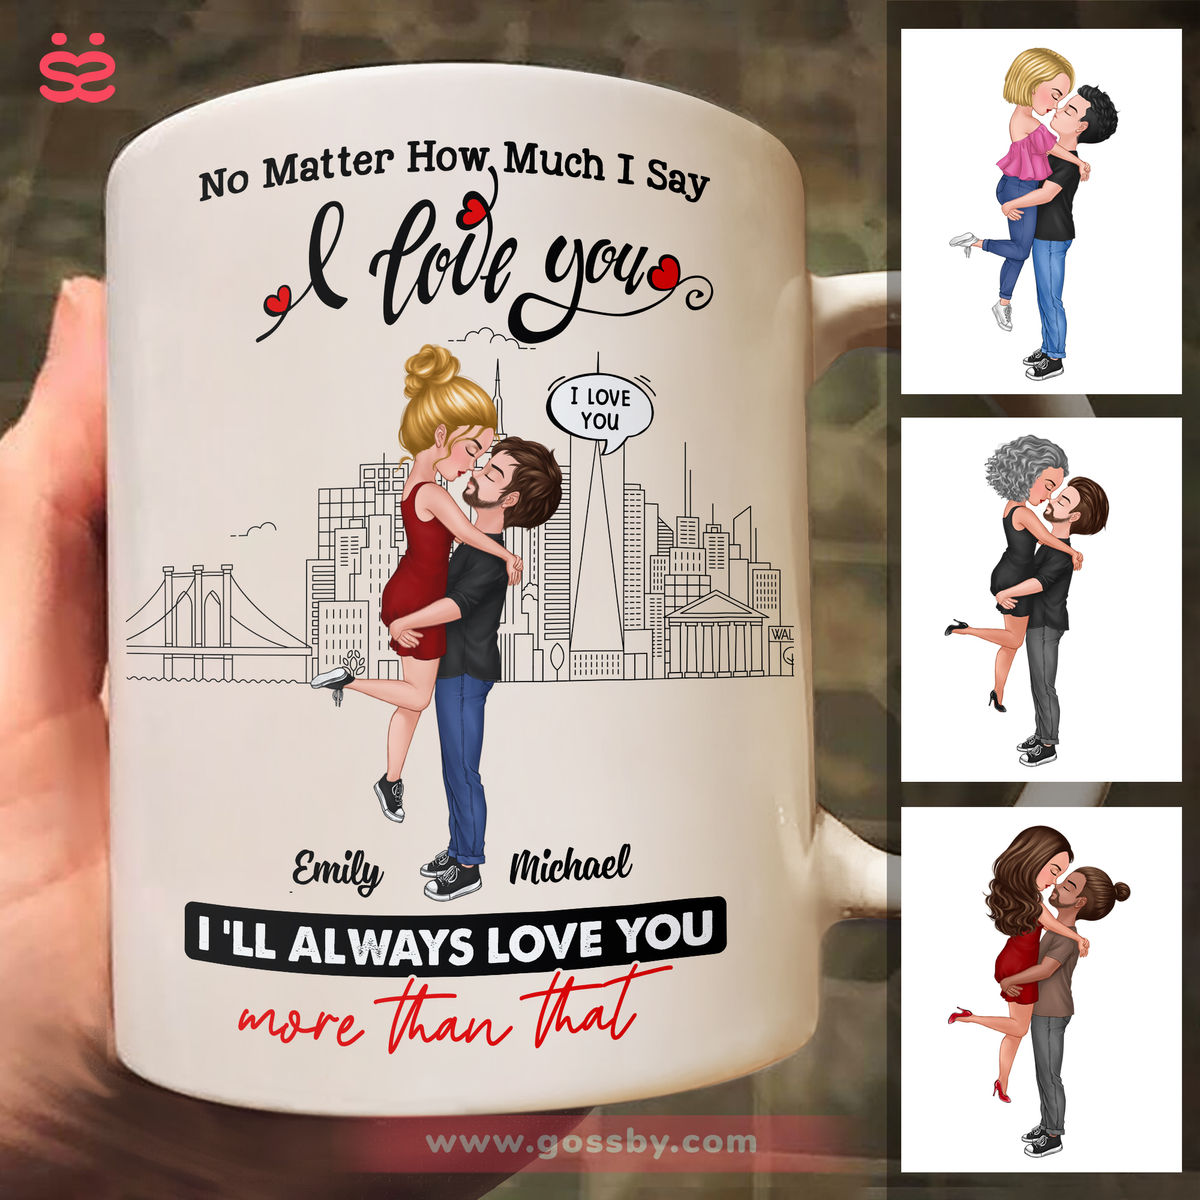 I Say I Love You - Valentine Gifts, Wedding Gifts, Anniversary Gifts